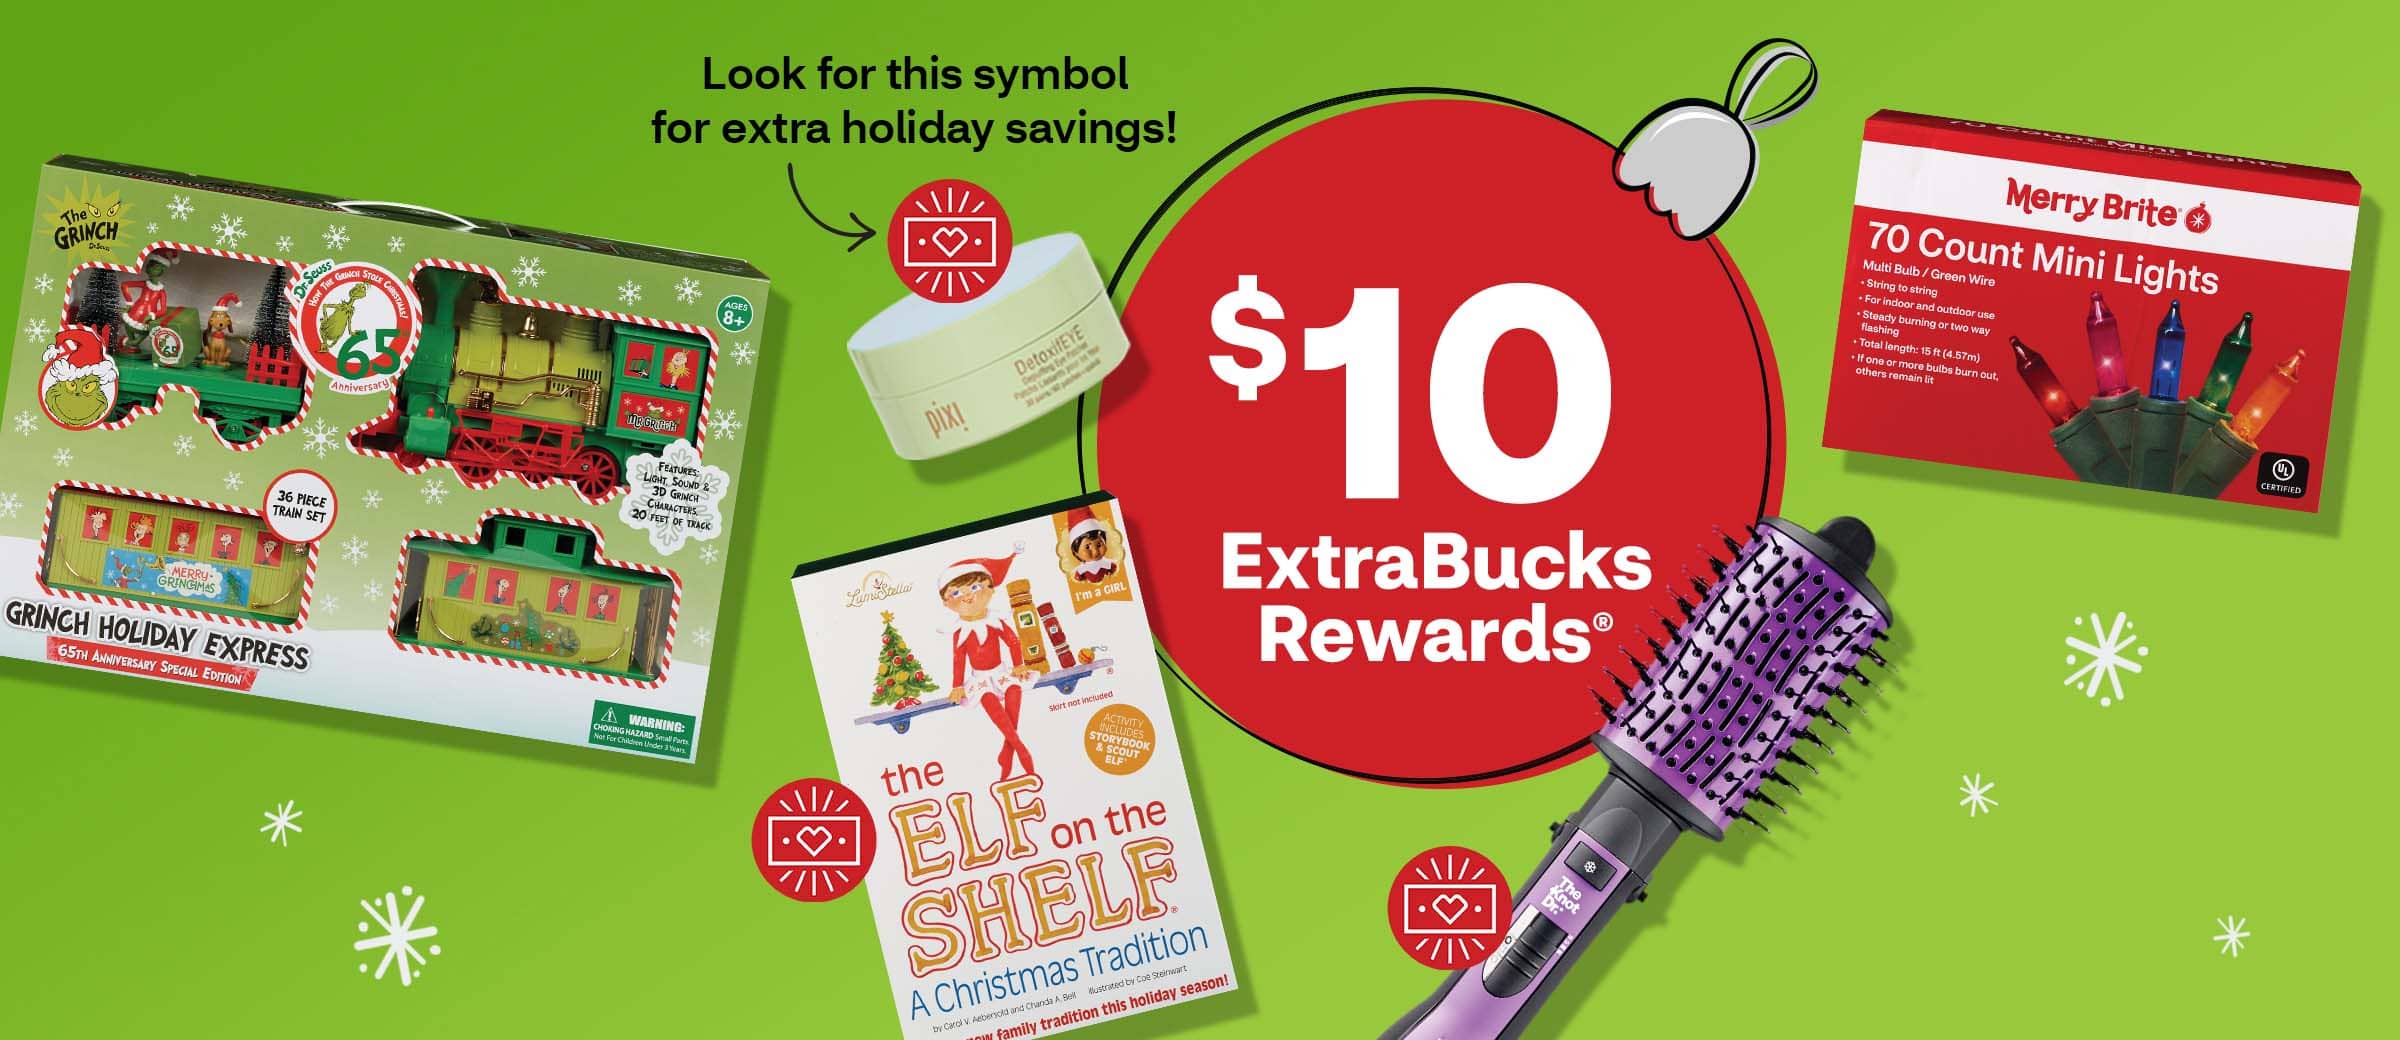 Look for this symbol for extra holiday savings! pointing to red dot with icon for ExtraBucks Rewards holiday offer, $10 ExtraBucks Rewards and holiday gift items